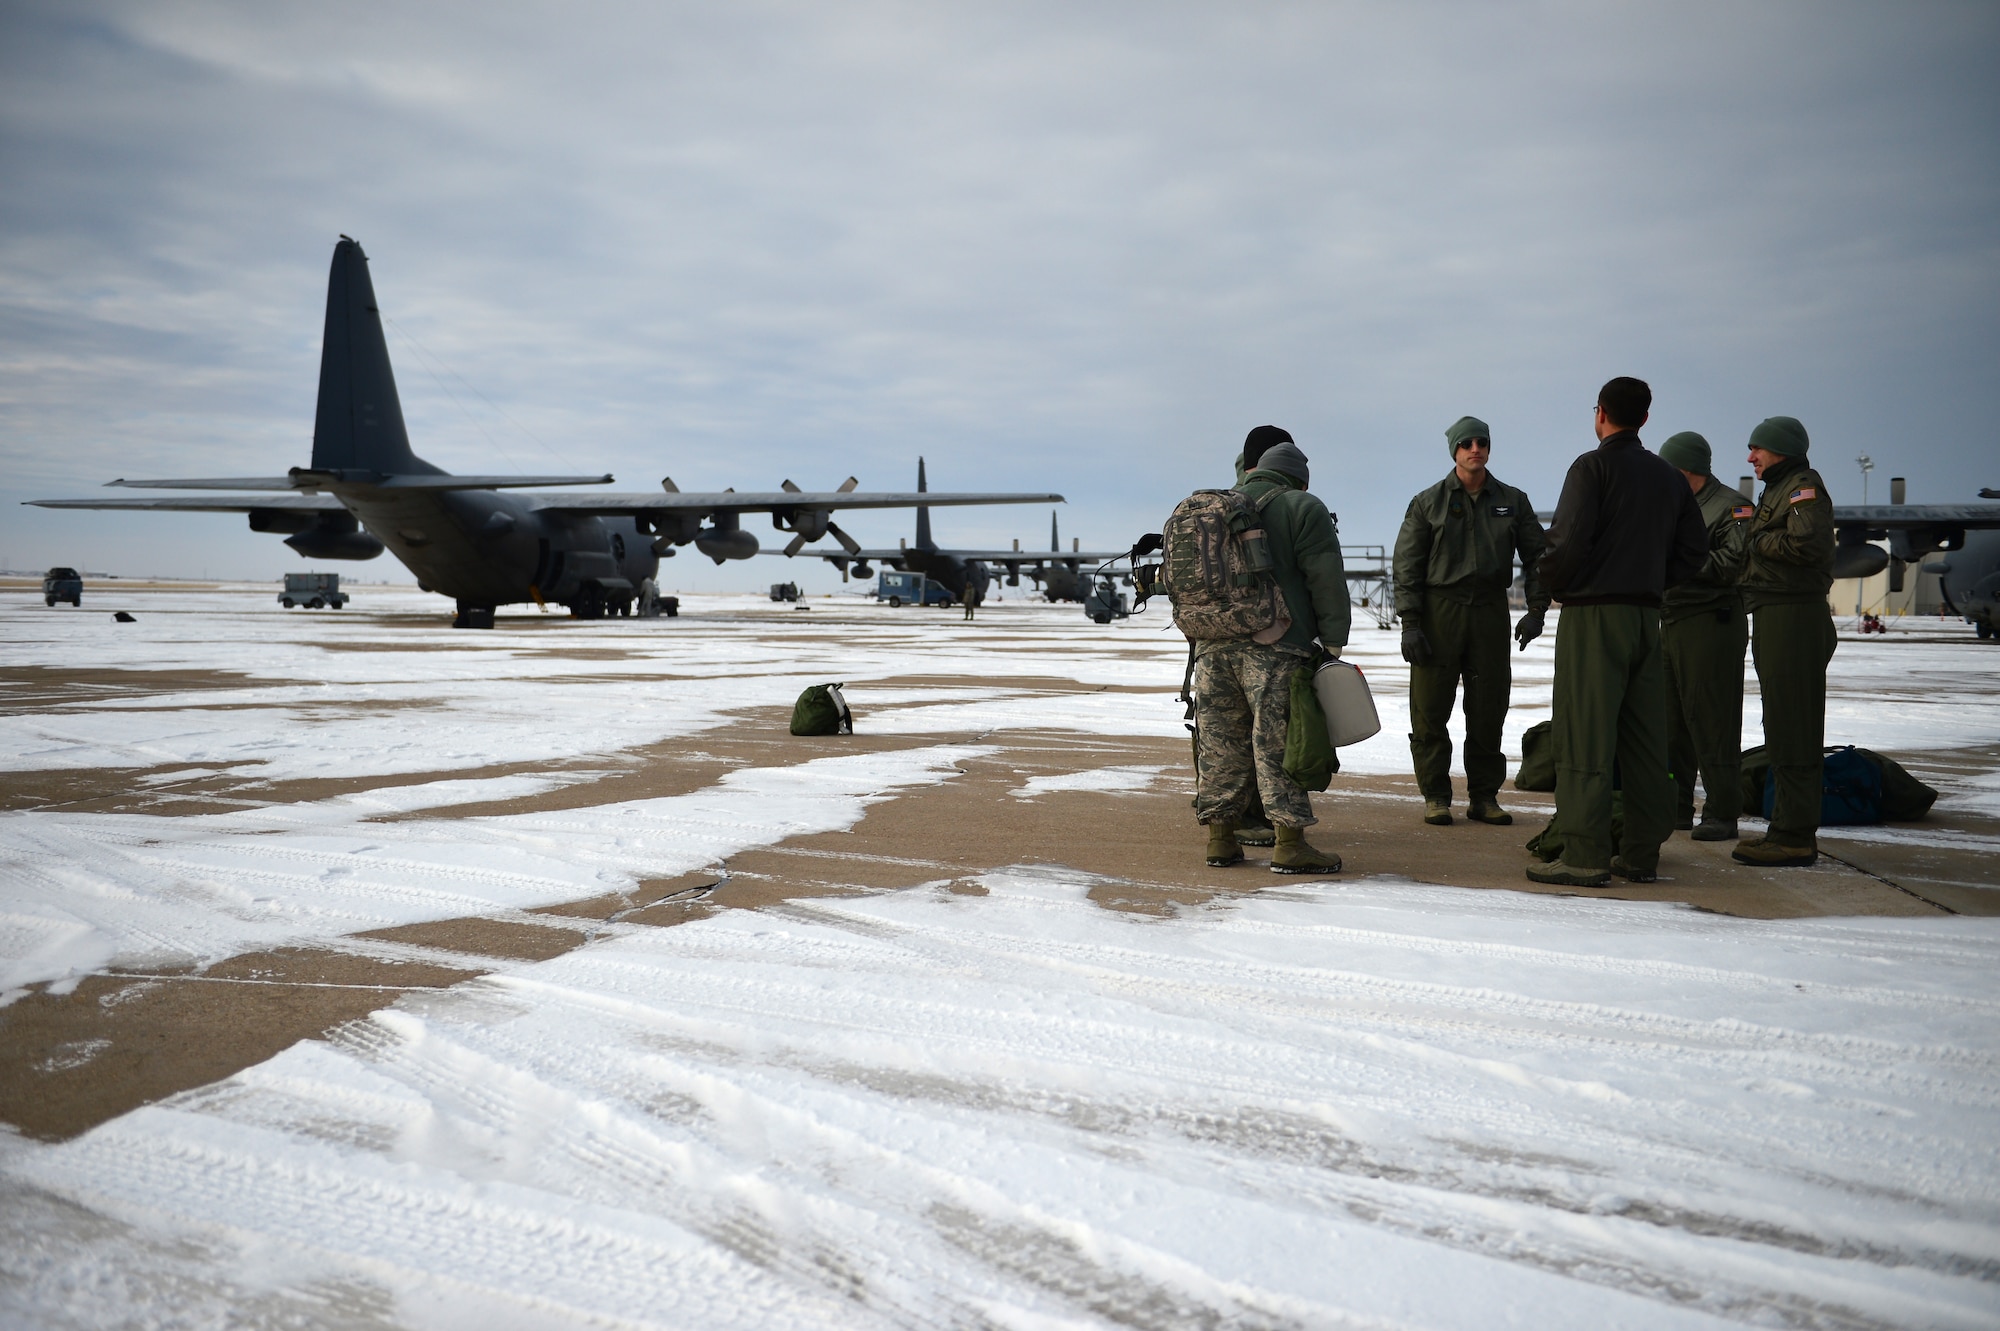 Aircrew members from the 16th Special Operations Squadron await the take-off of the AC-130H Spectre gunship "Bad Company" on the flightline at Cannon Air Force Base, N.M., Feb. 7, 2014. Built in 1969, Bad Company is the first of six Spectre gunships scheduled to make the trip to Davis-Monthan Air Force Base, Ariz. (U.S. Air Force photo/ Senior Airman Eboni Reece)
